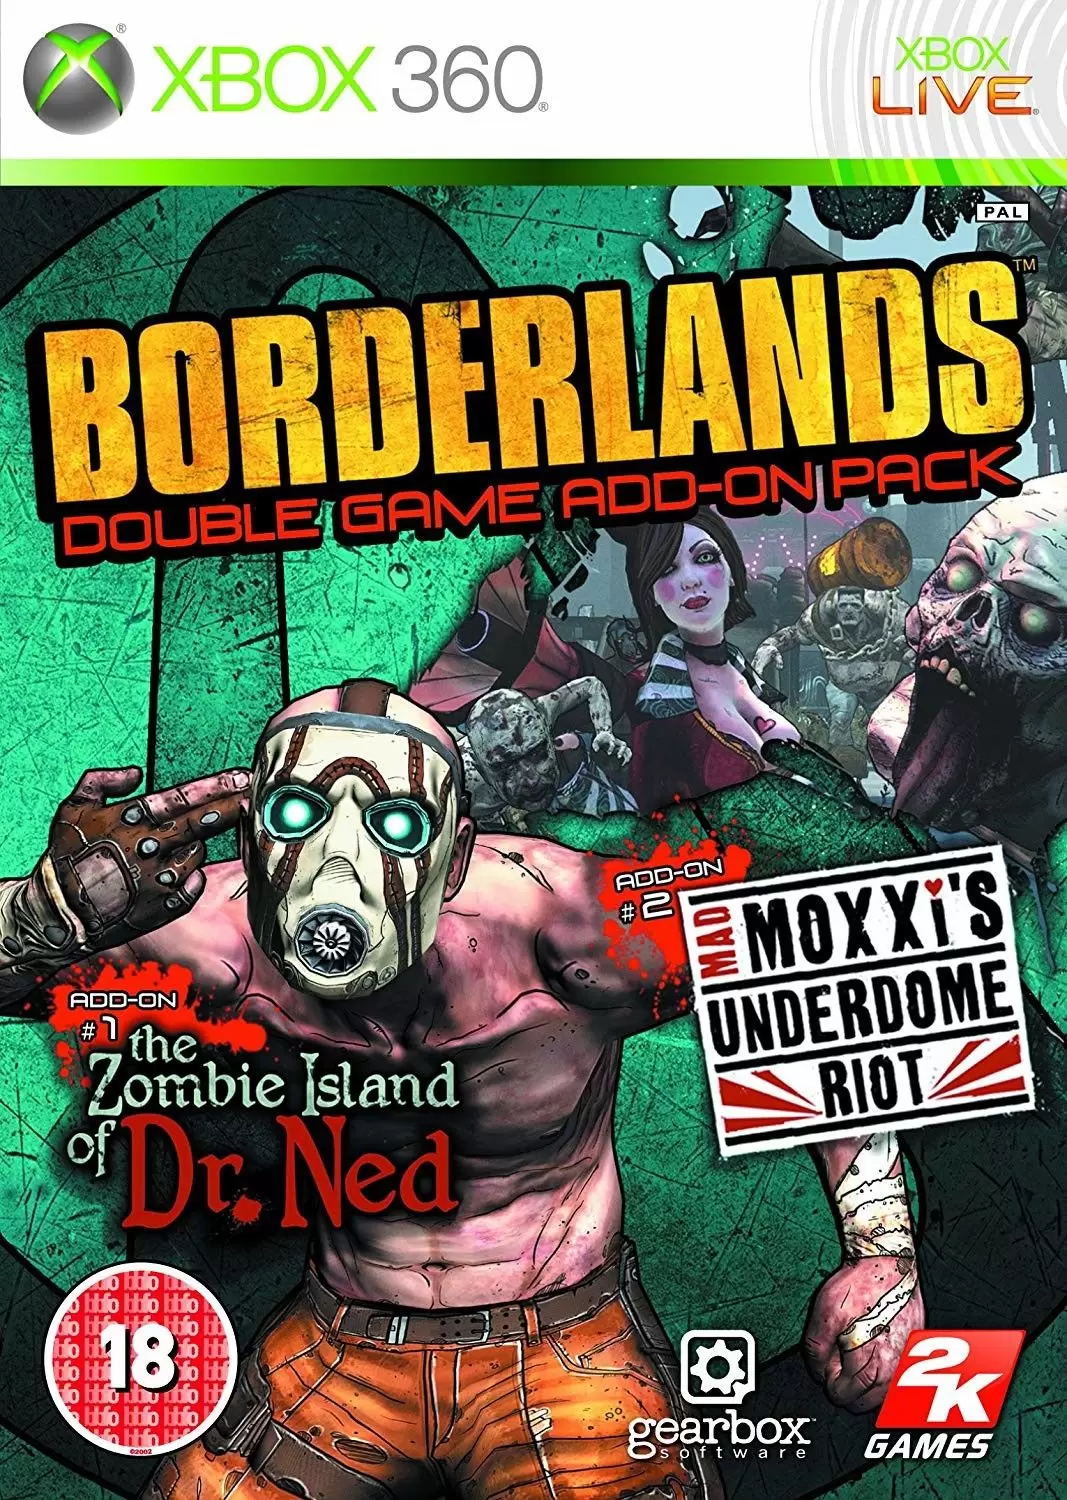 XBOX 360 Games - Borderlands: The Zombie Island of Dr. Ned